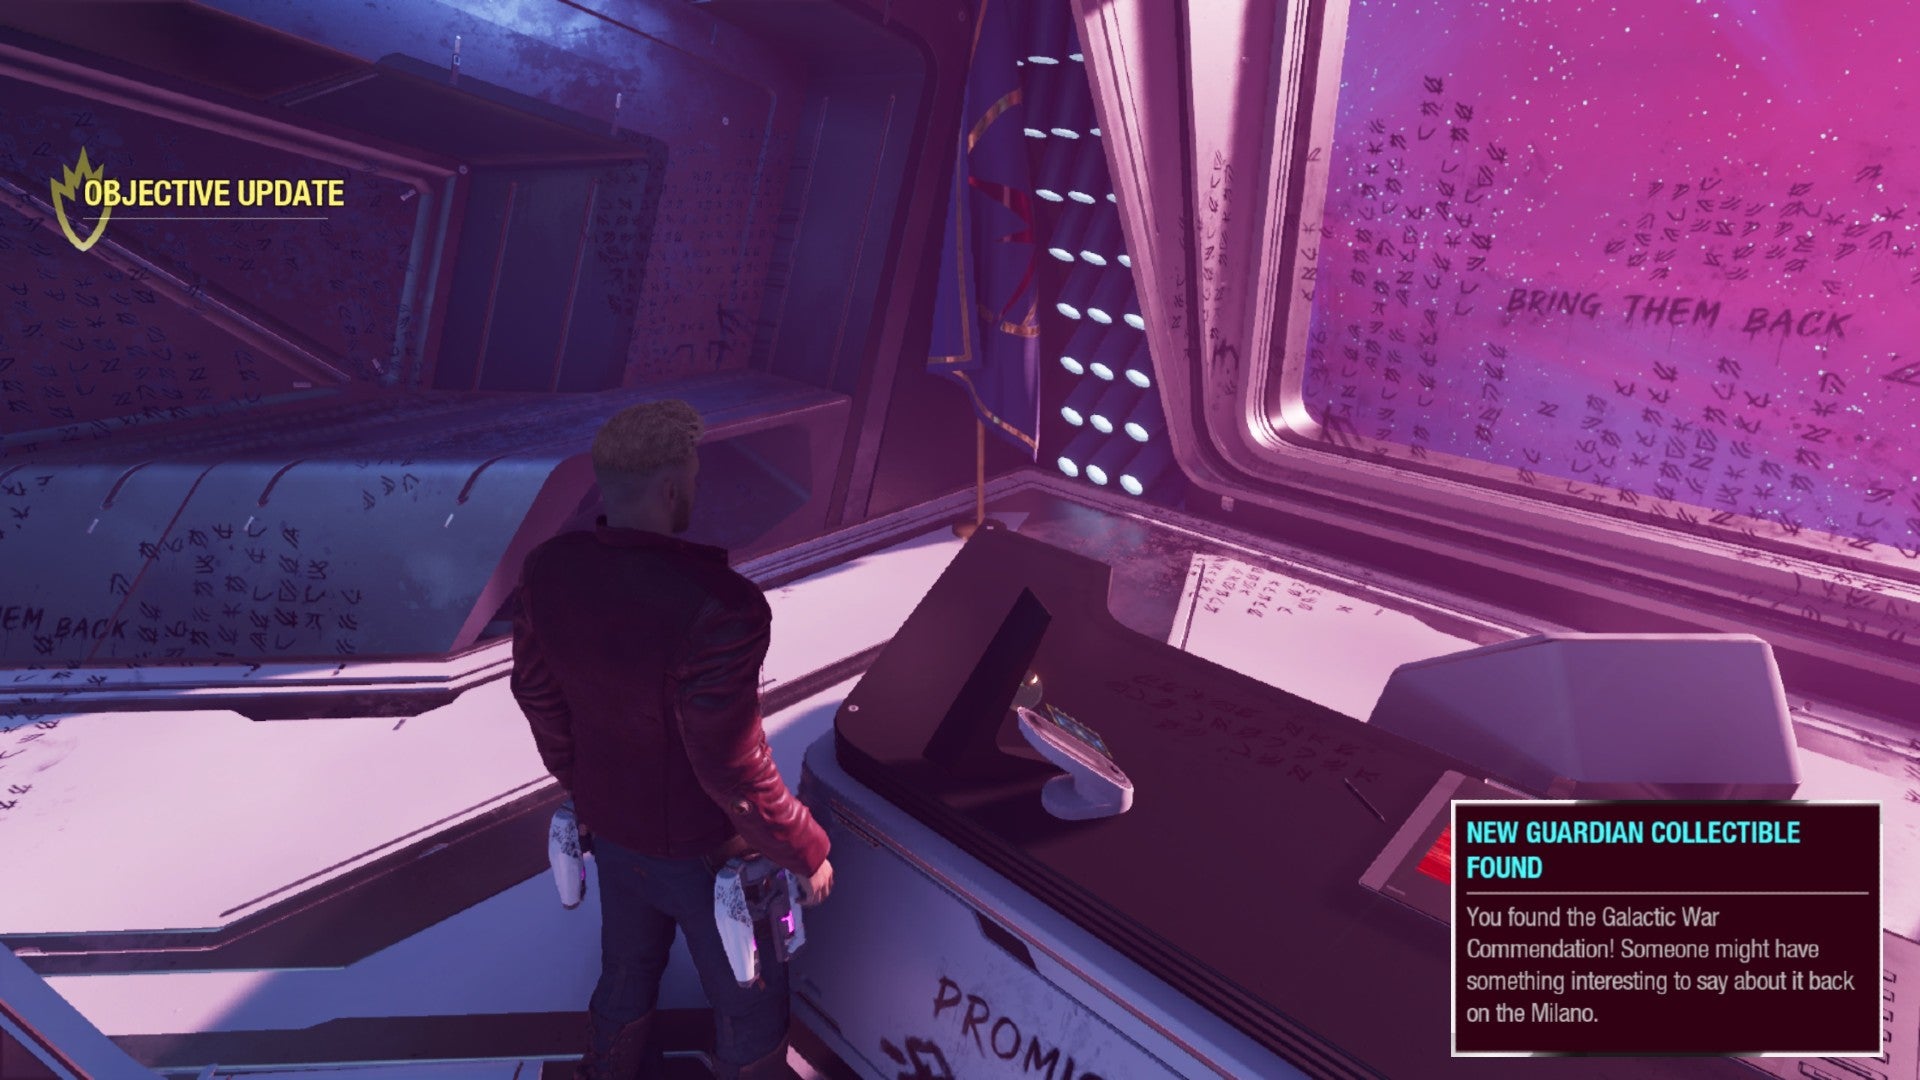 Star-Lord stood by Ko'Rel's desk, flag is in corner with Commendation Star on the ground. Writing is scrawled on window and other surfaces